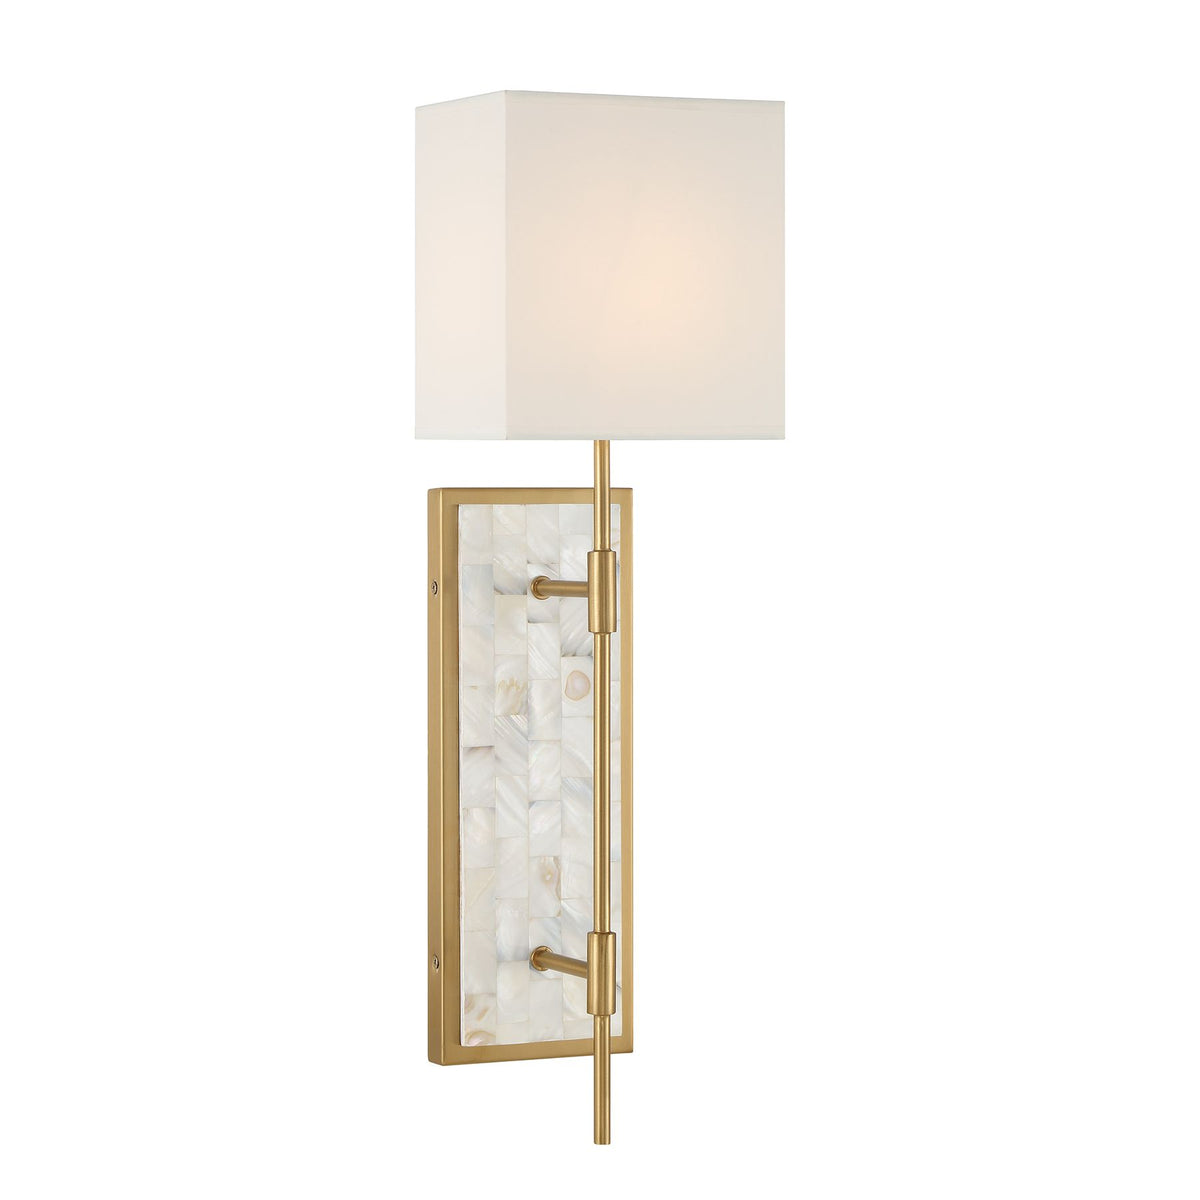 Eastover Wall Sconce